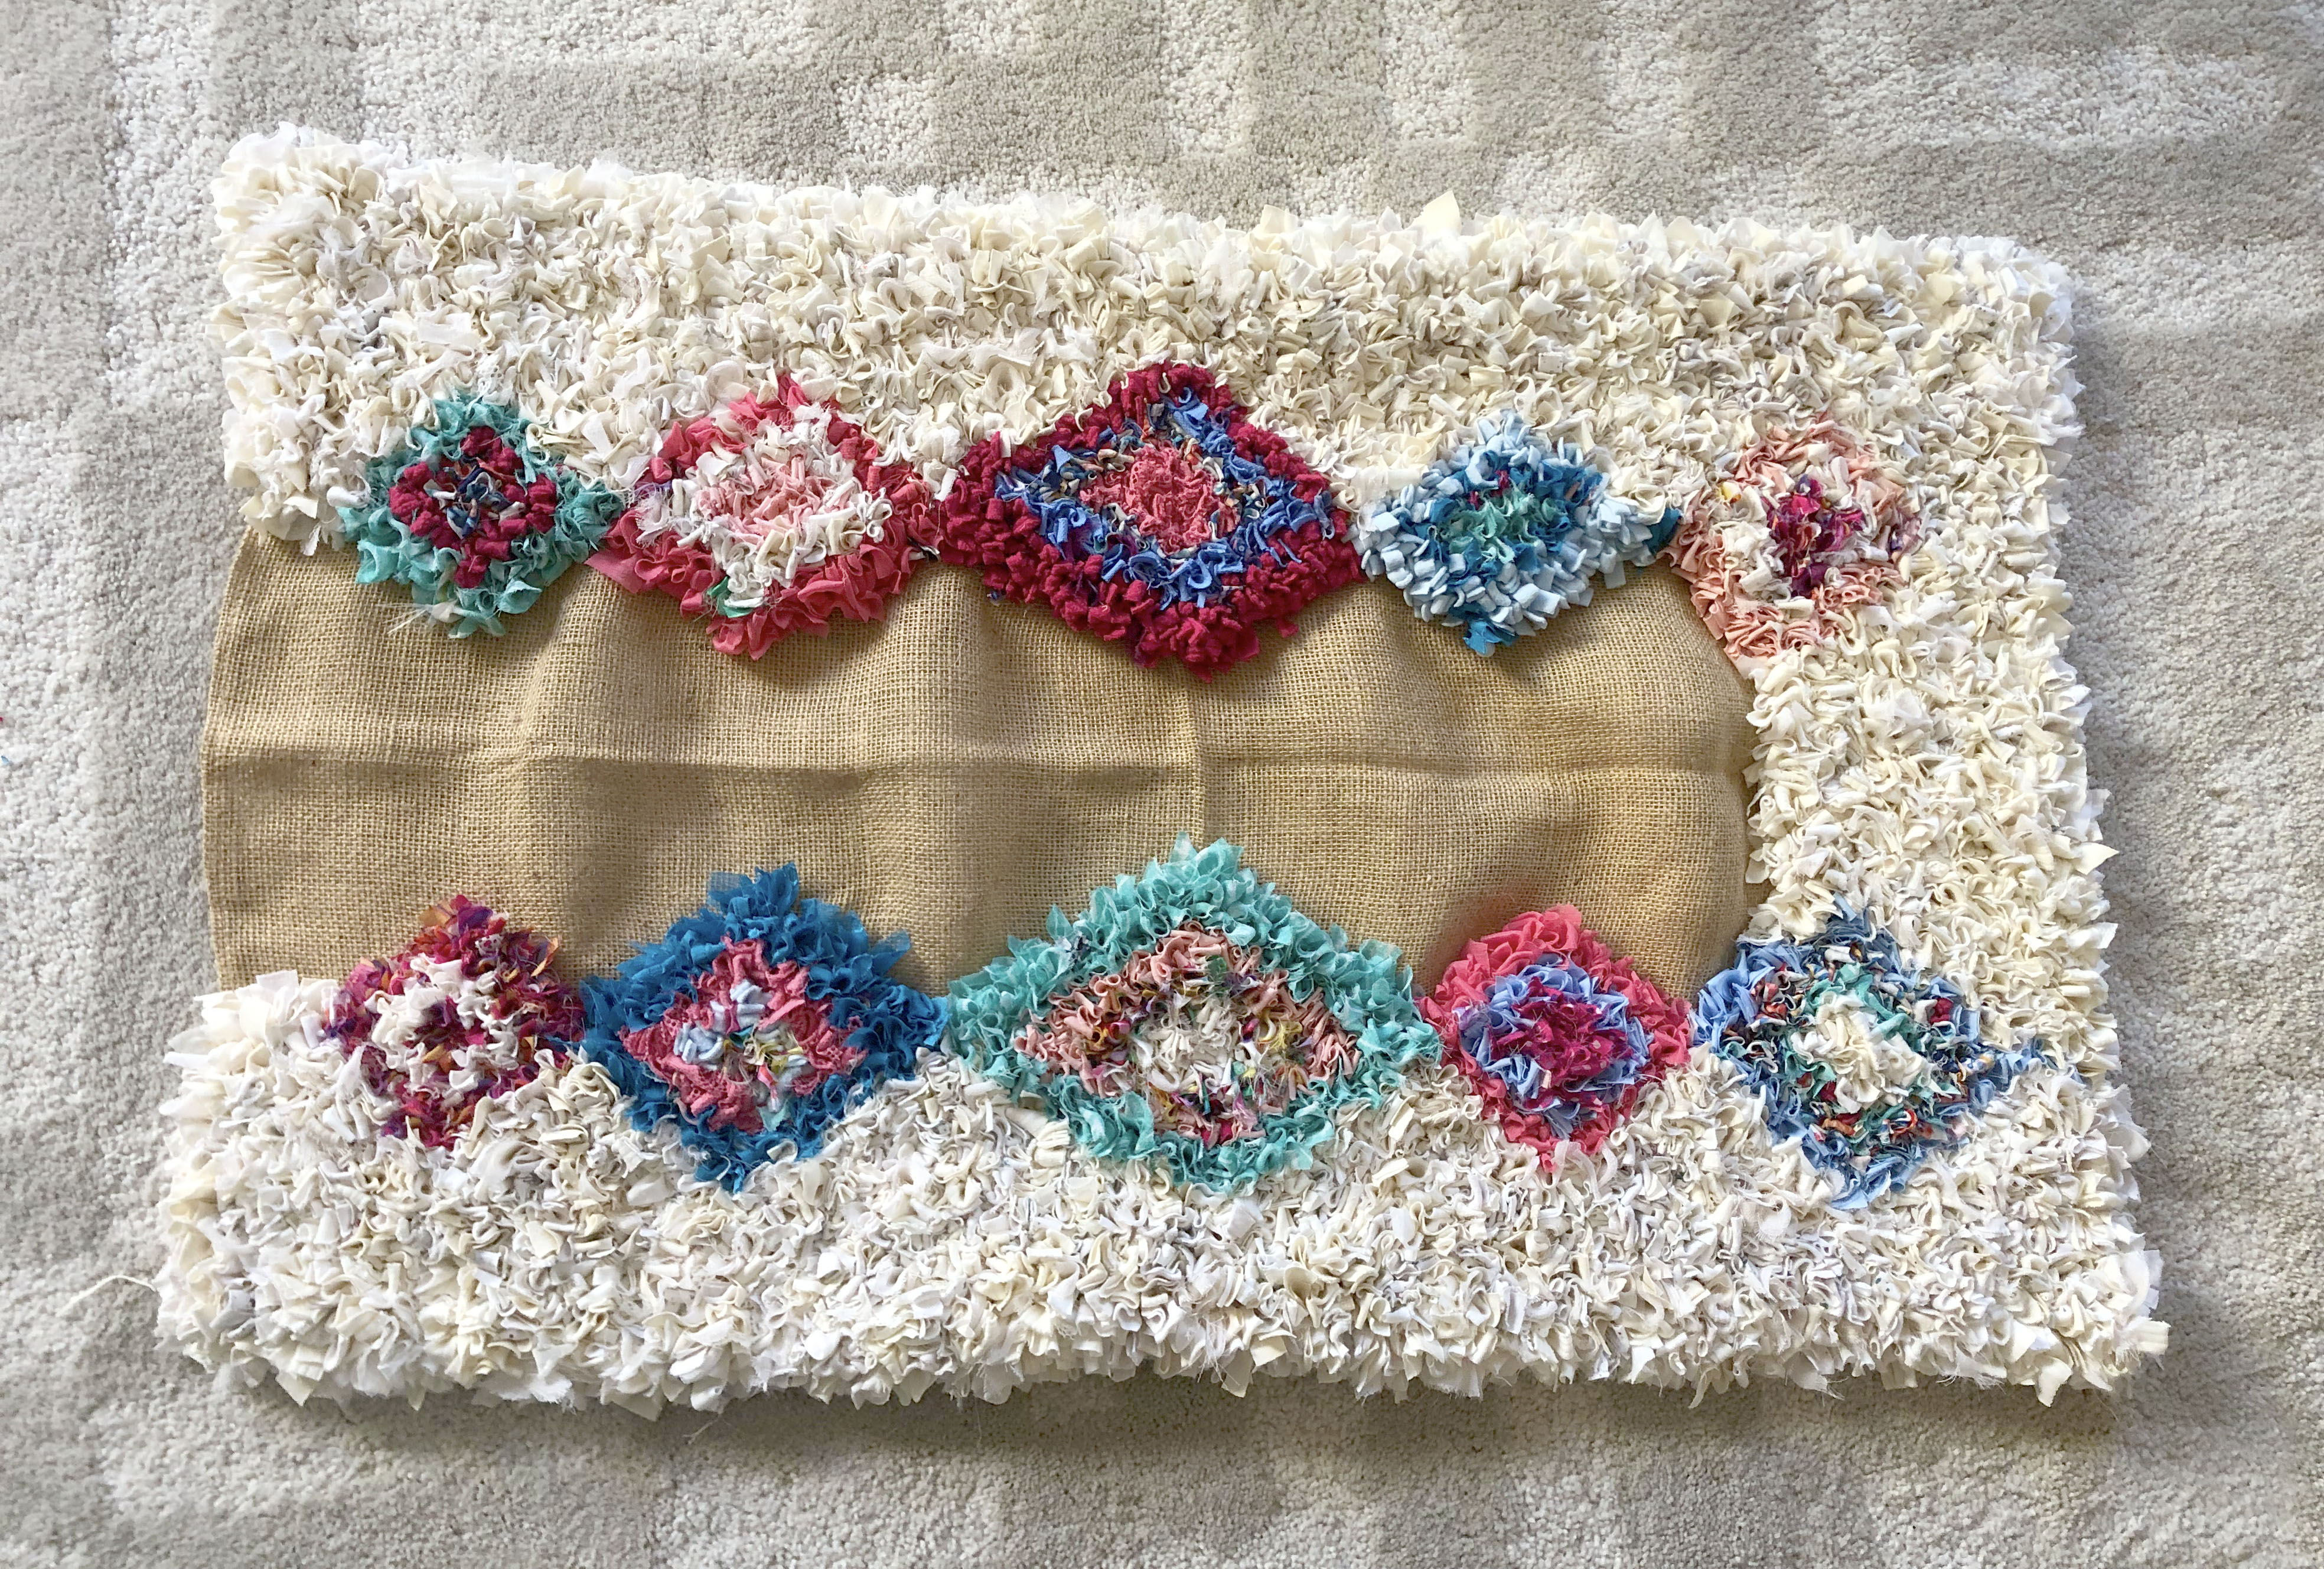 Nearly finished rag rug made on hessian or burlap using recycled materials